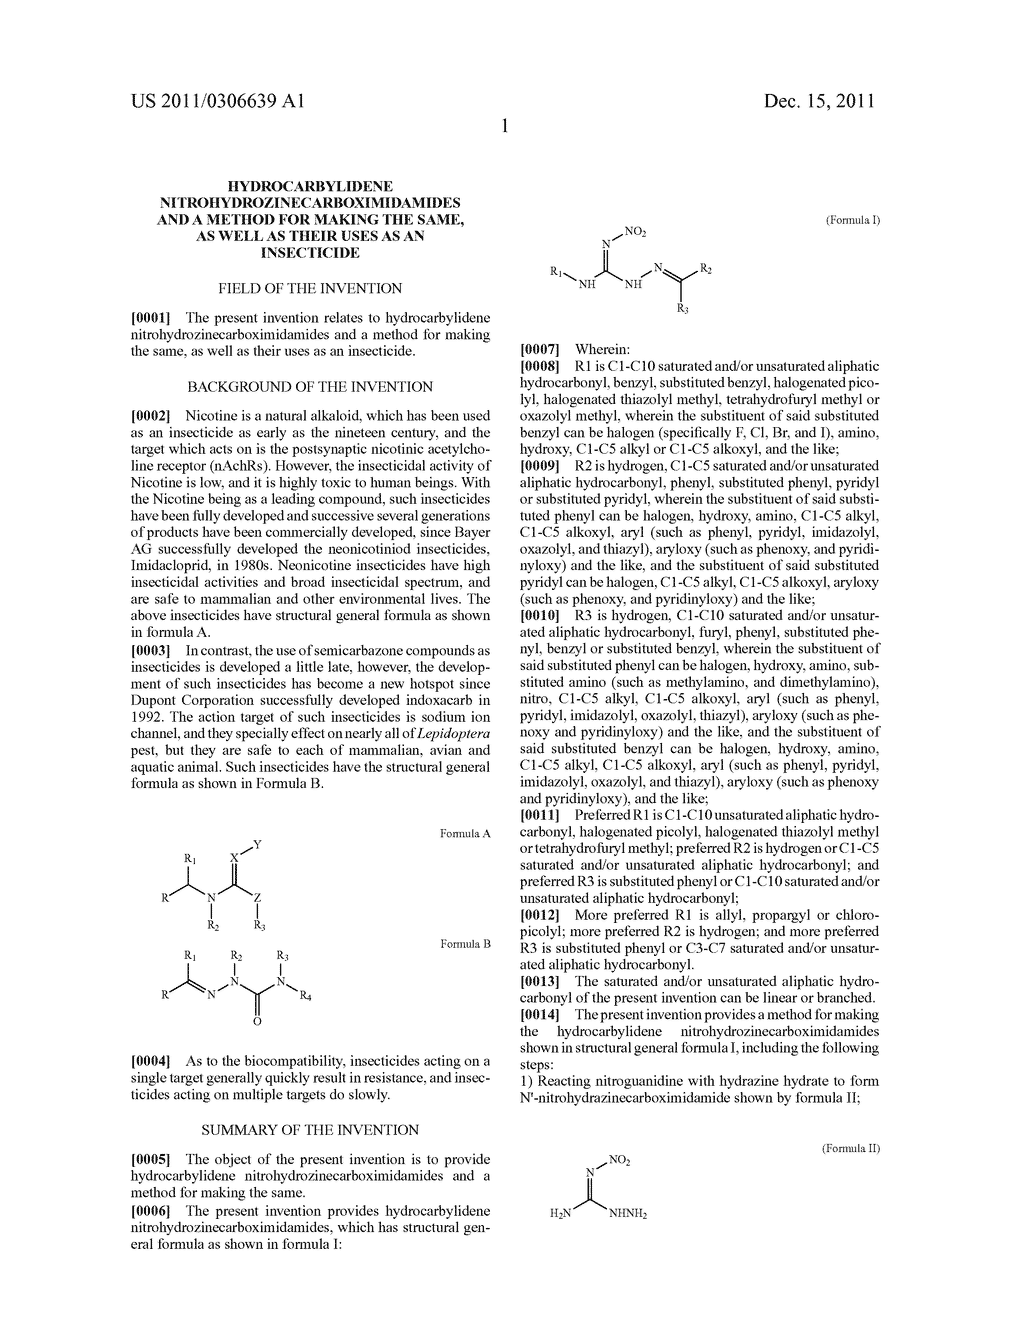 HYDROCARBYLIDENE NITROHYDROZINECARBOXIMIDAMIDES AND A METHOD FOR MAKING     THE SAME, AS WELL AS THEIR USES AS AN INSECTICIDE - diagram, schematic, and image 02